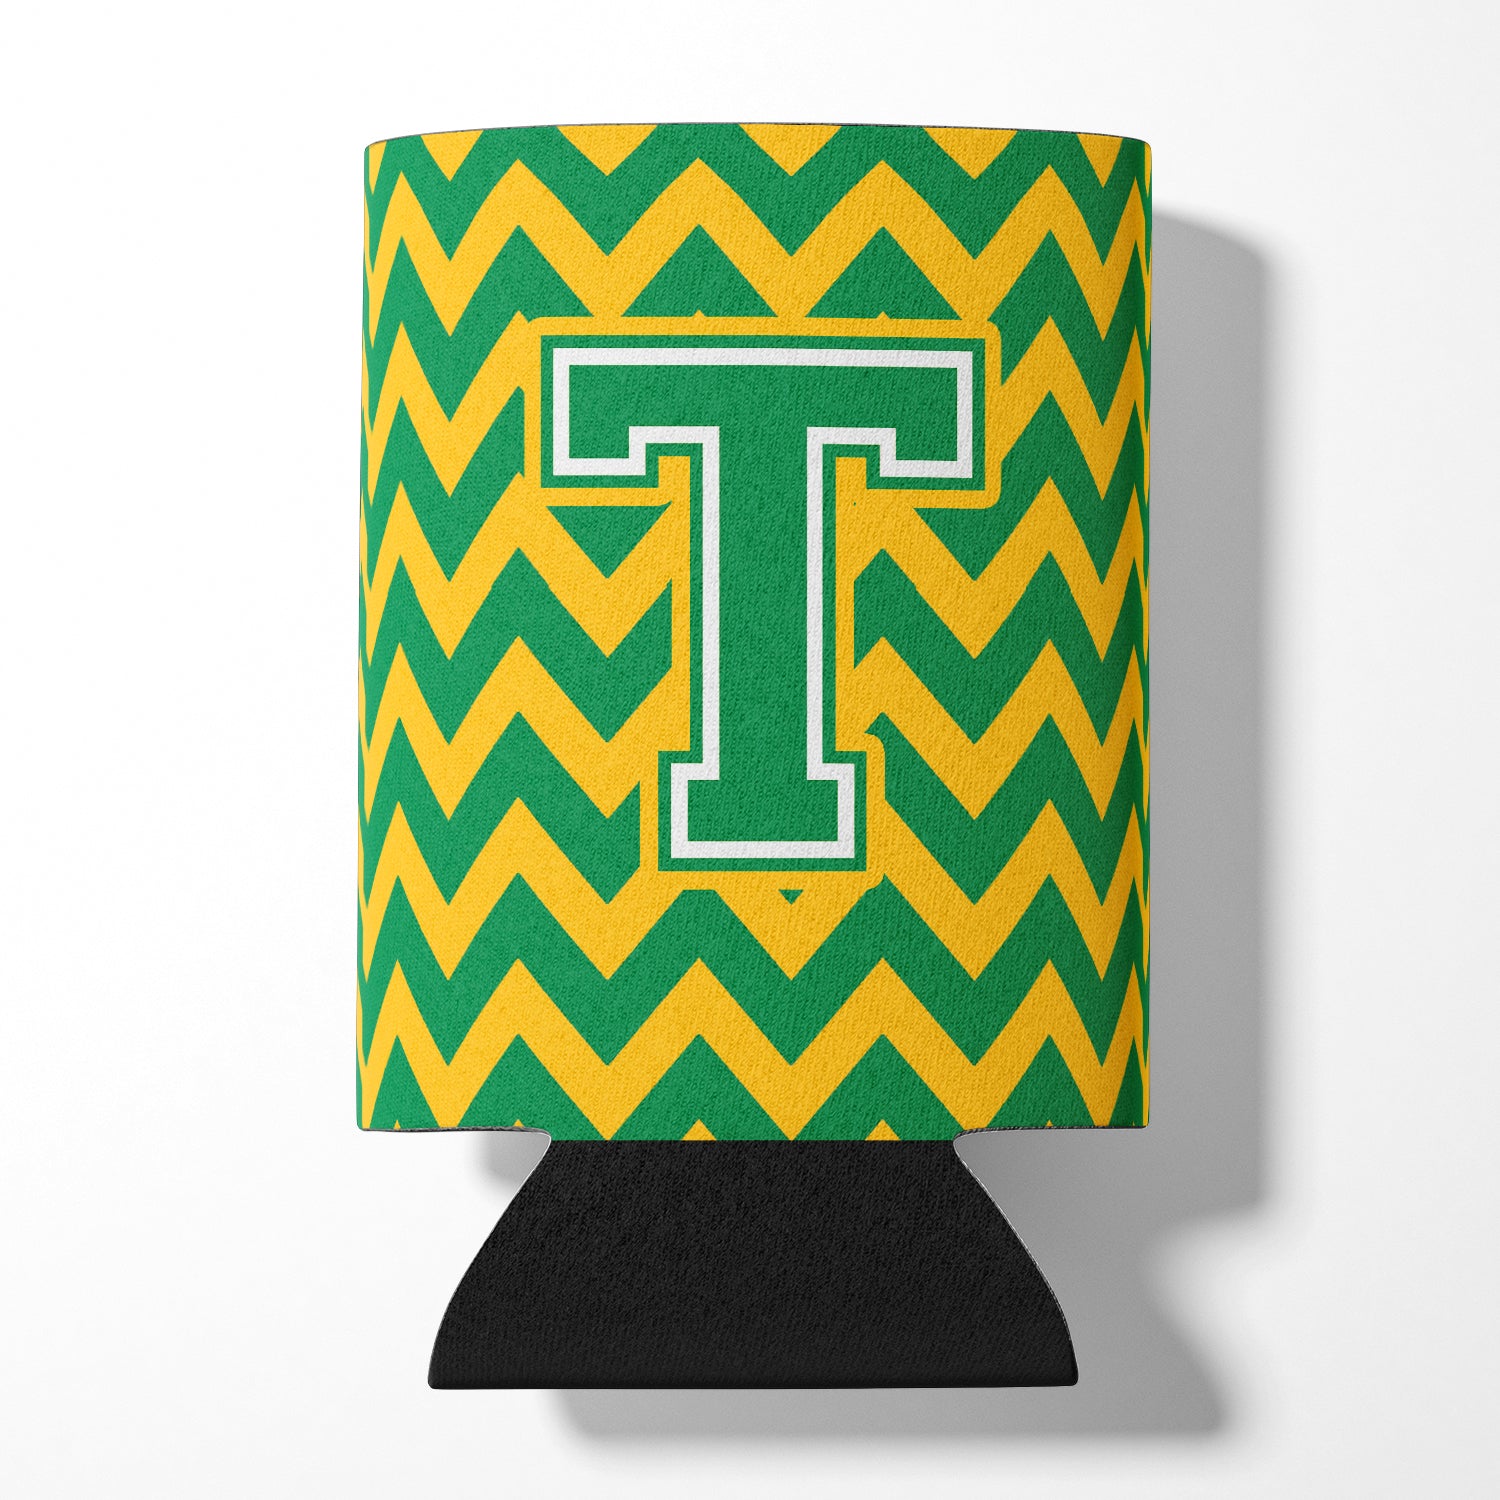 Letter T Chevron Green and Gold Can or Bottle Hugger CJ1059-TCC